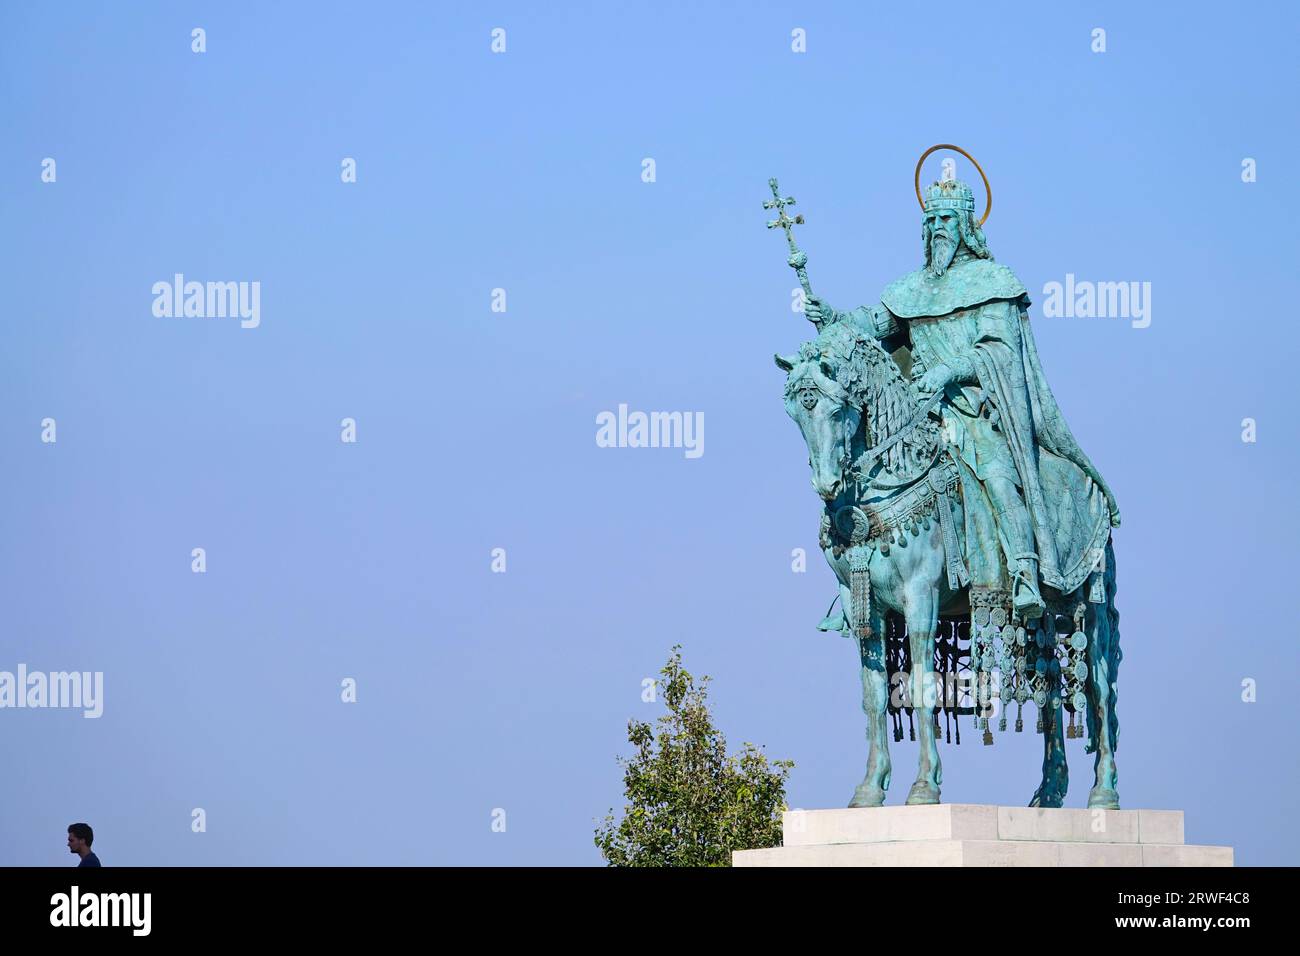 The Statue of Saint Stephen (Stephen I, first king of Hungary), in the southern court of the Fisherman's Bastion in Budapest. It was made by sculpture Stock Photo